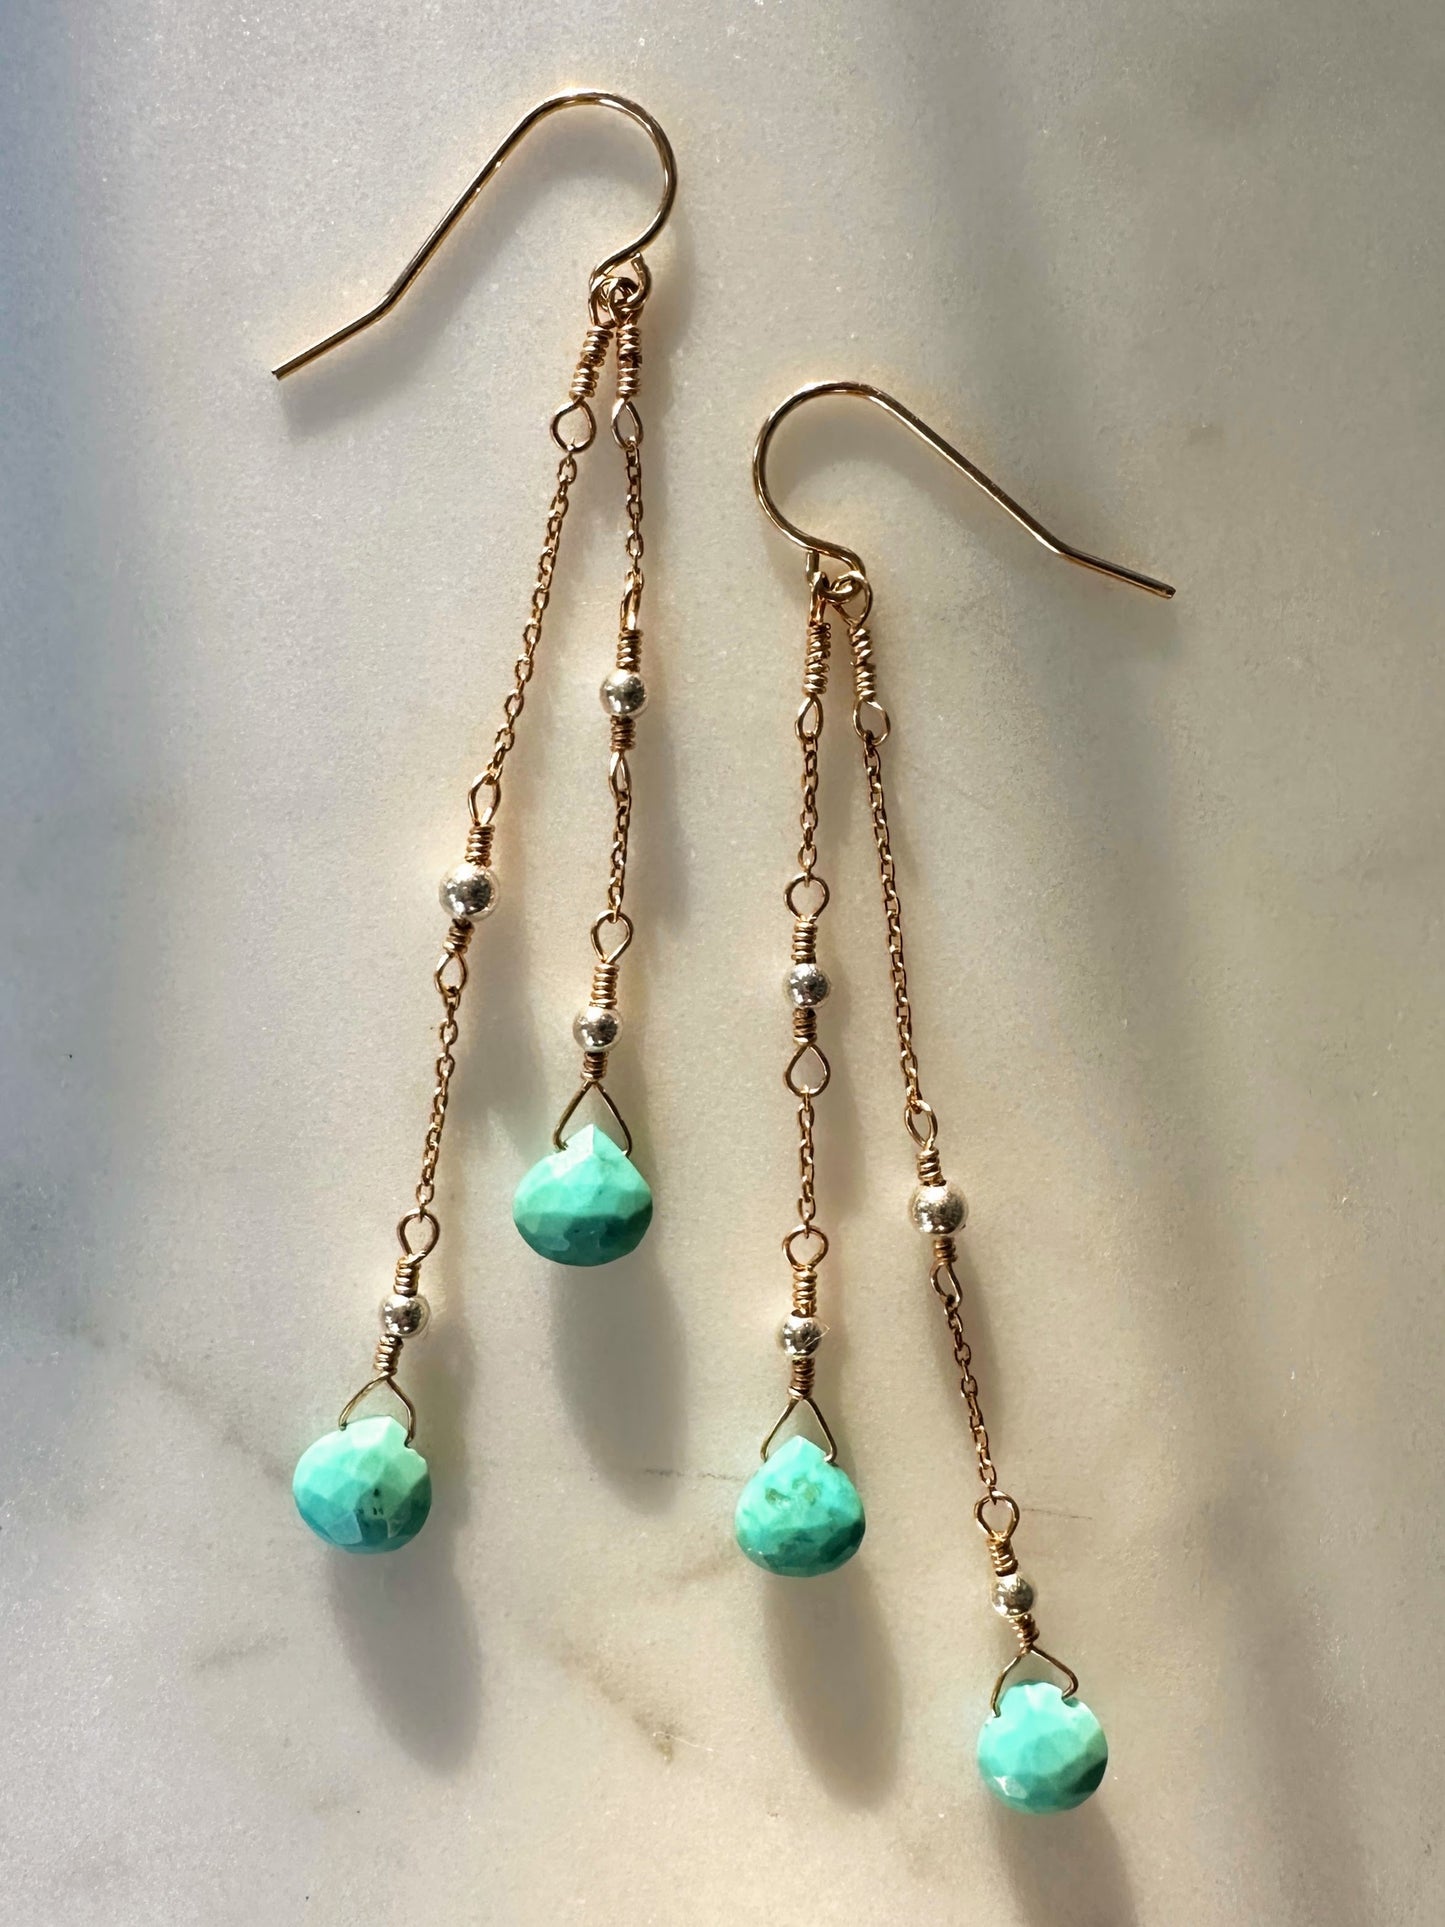 The Lotus Earring in Turquoise With Mixed Metals